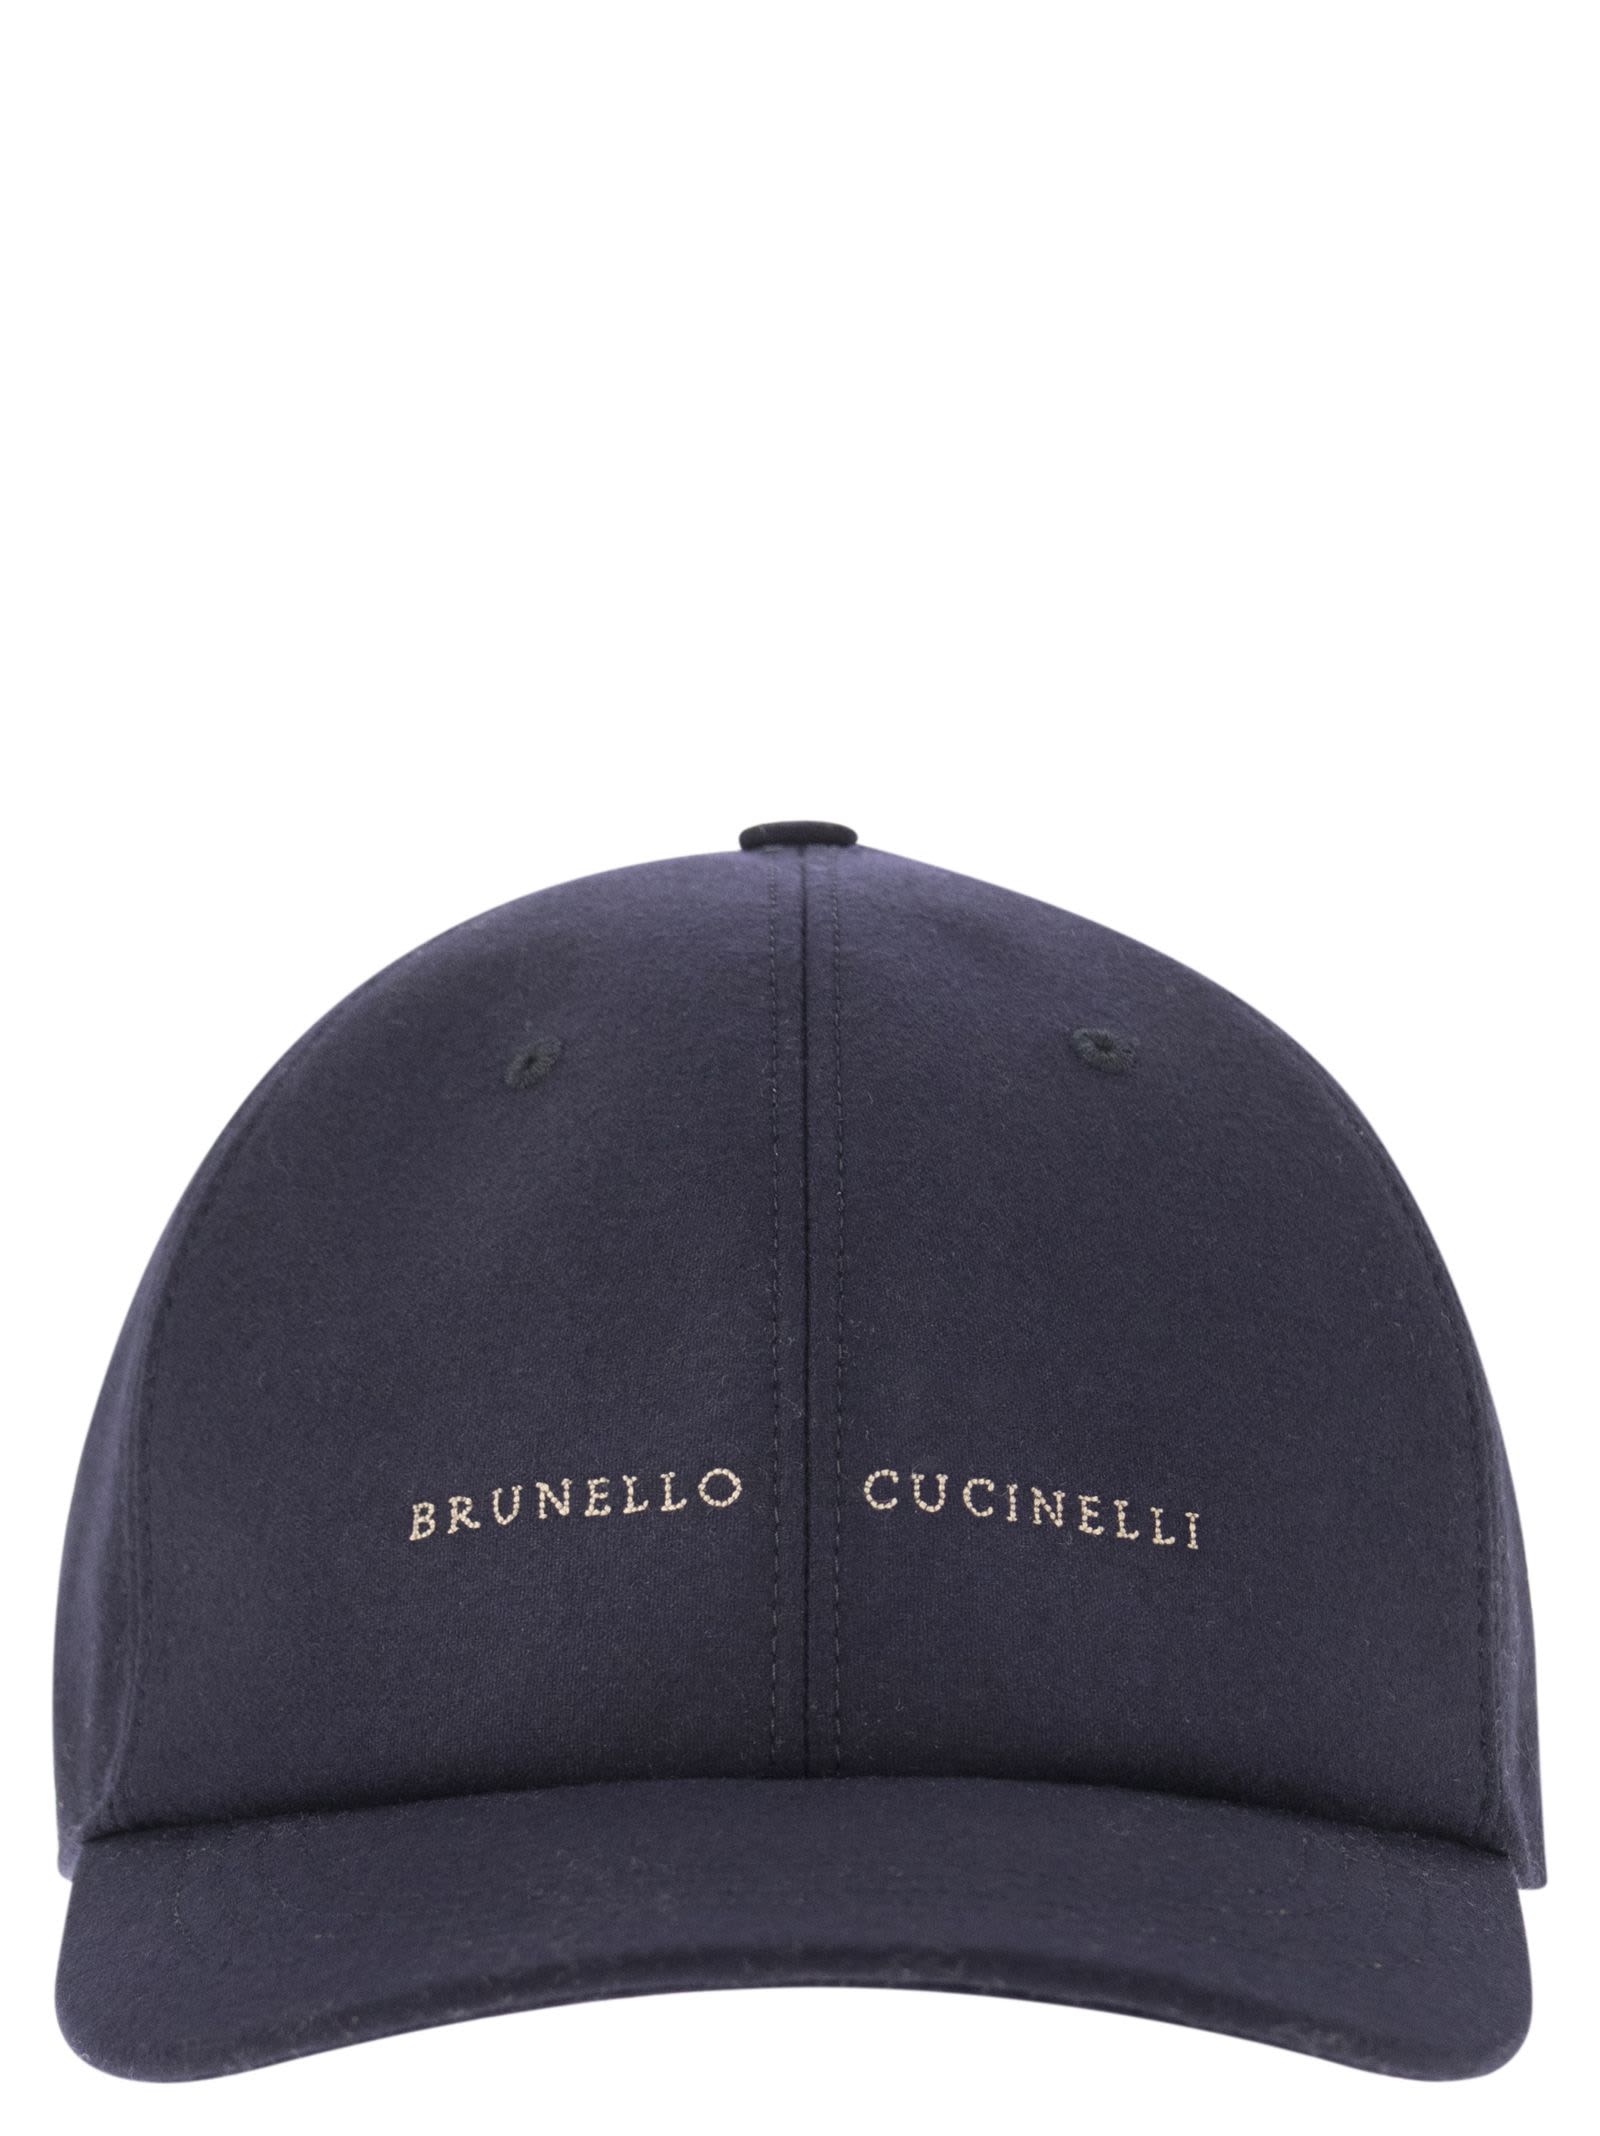 BRUNELLO CUCINELLI CASHMERE AND SILK BASEBALL CAP WITH EMBROIDERY